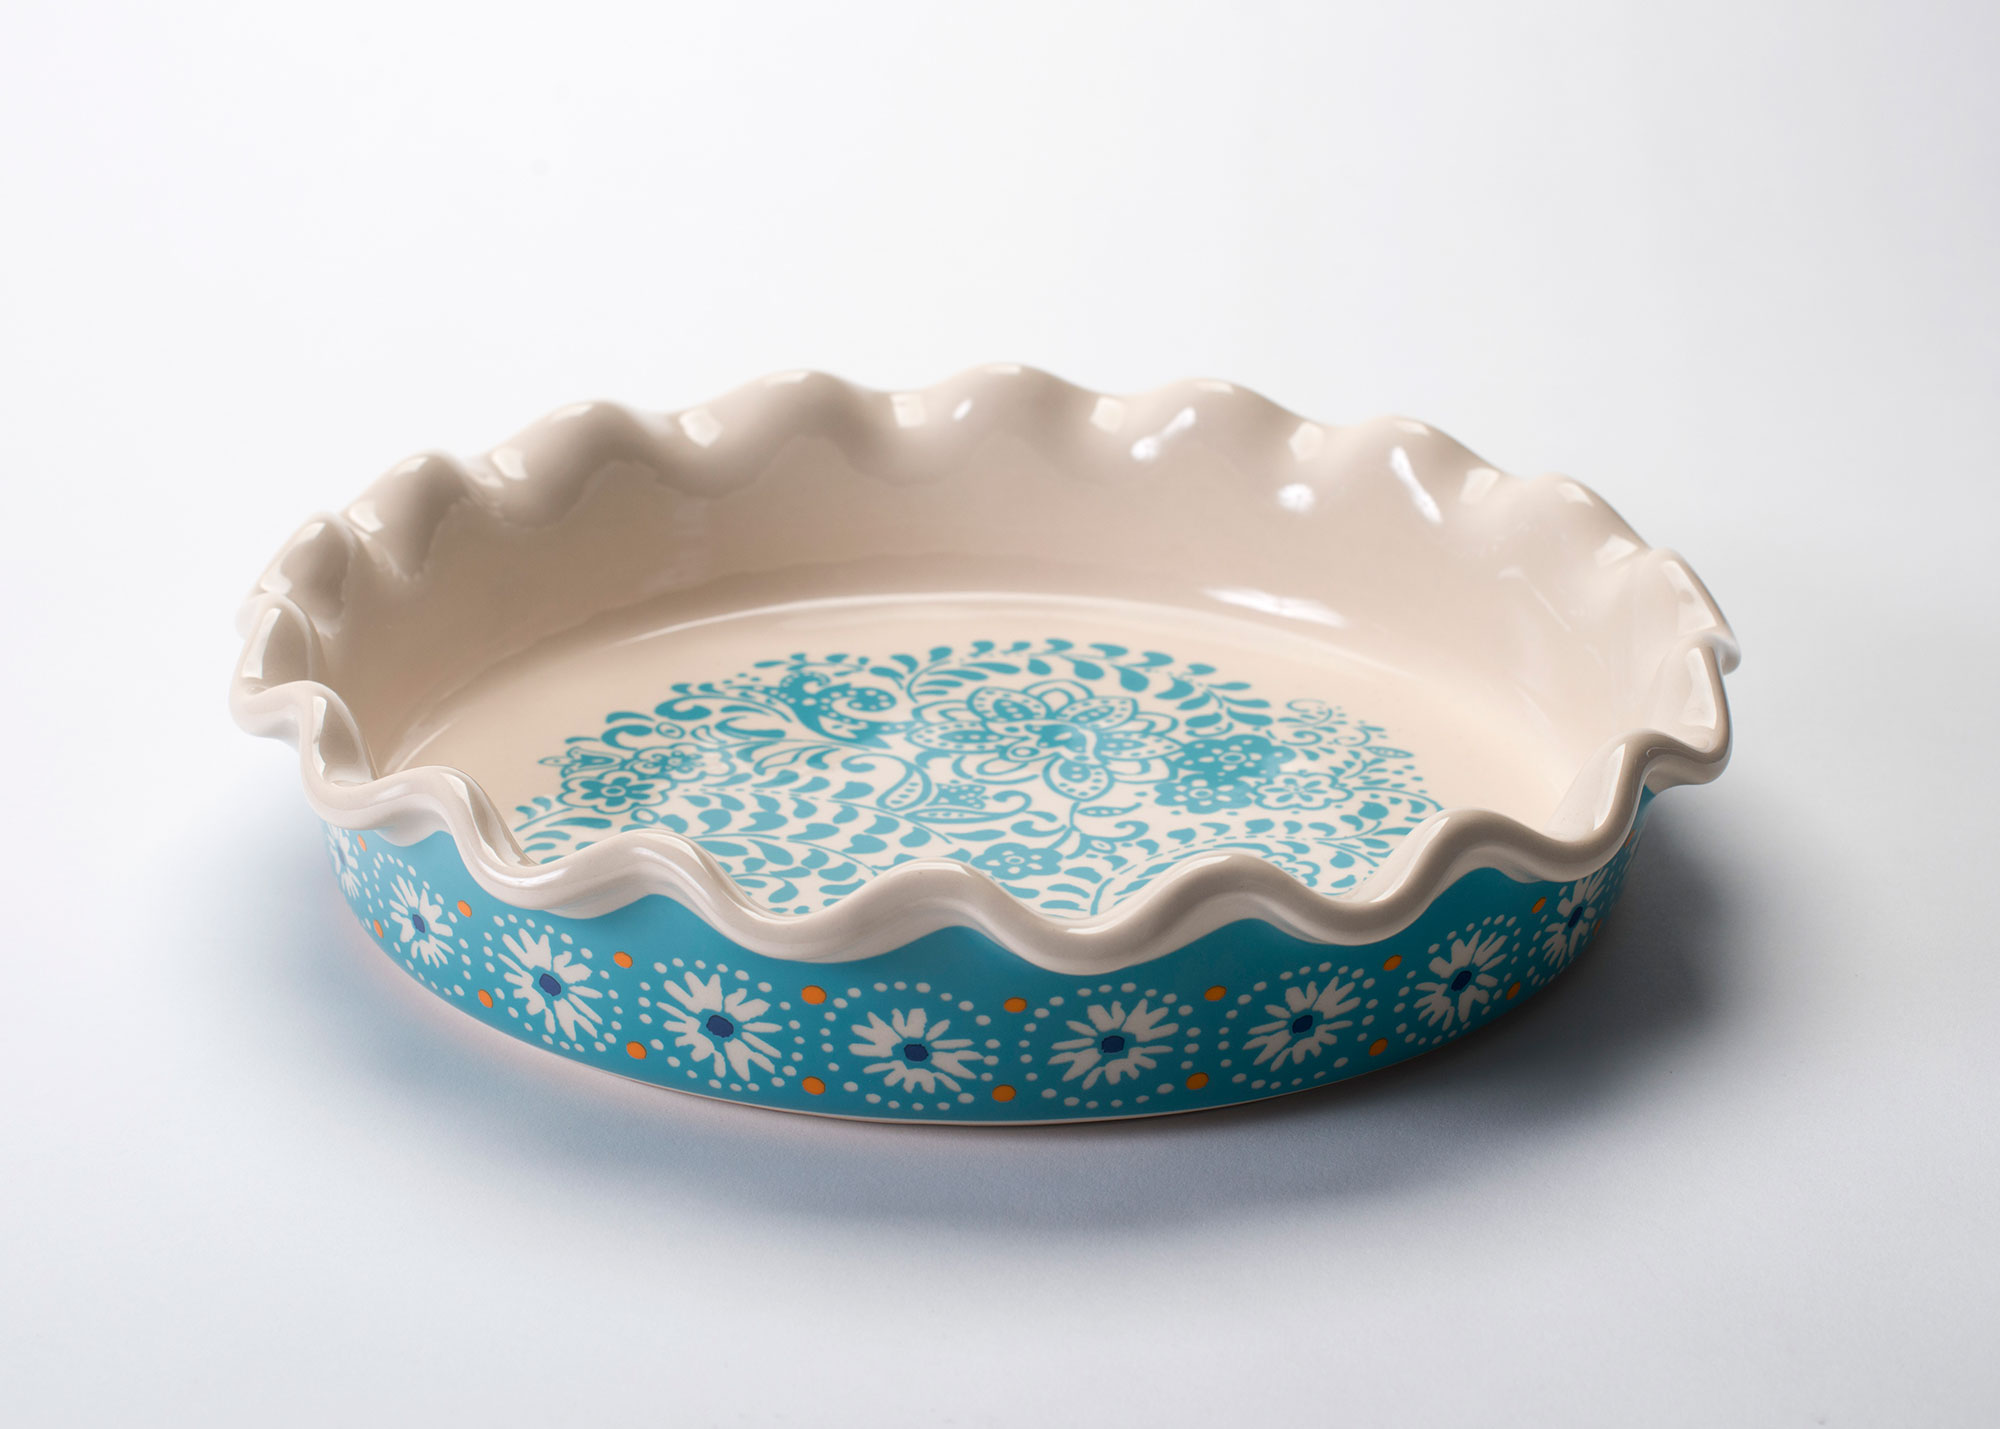 Plate with blue floral decoration and ruffled edge.